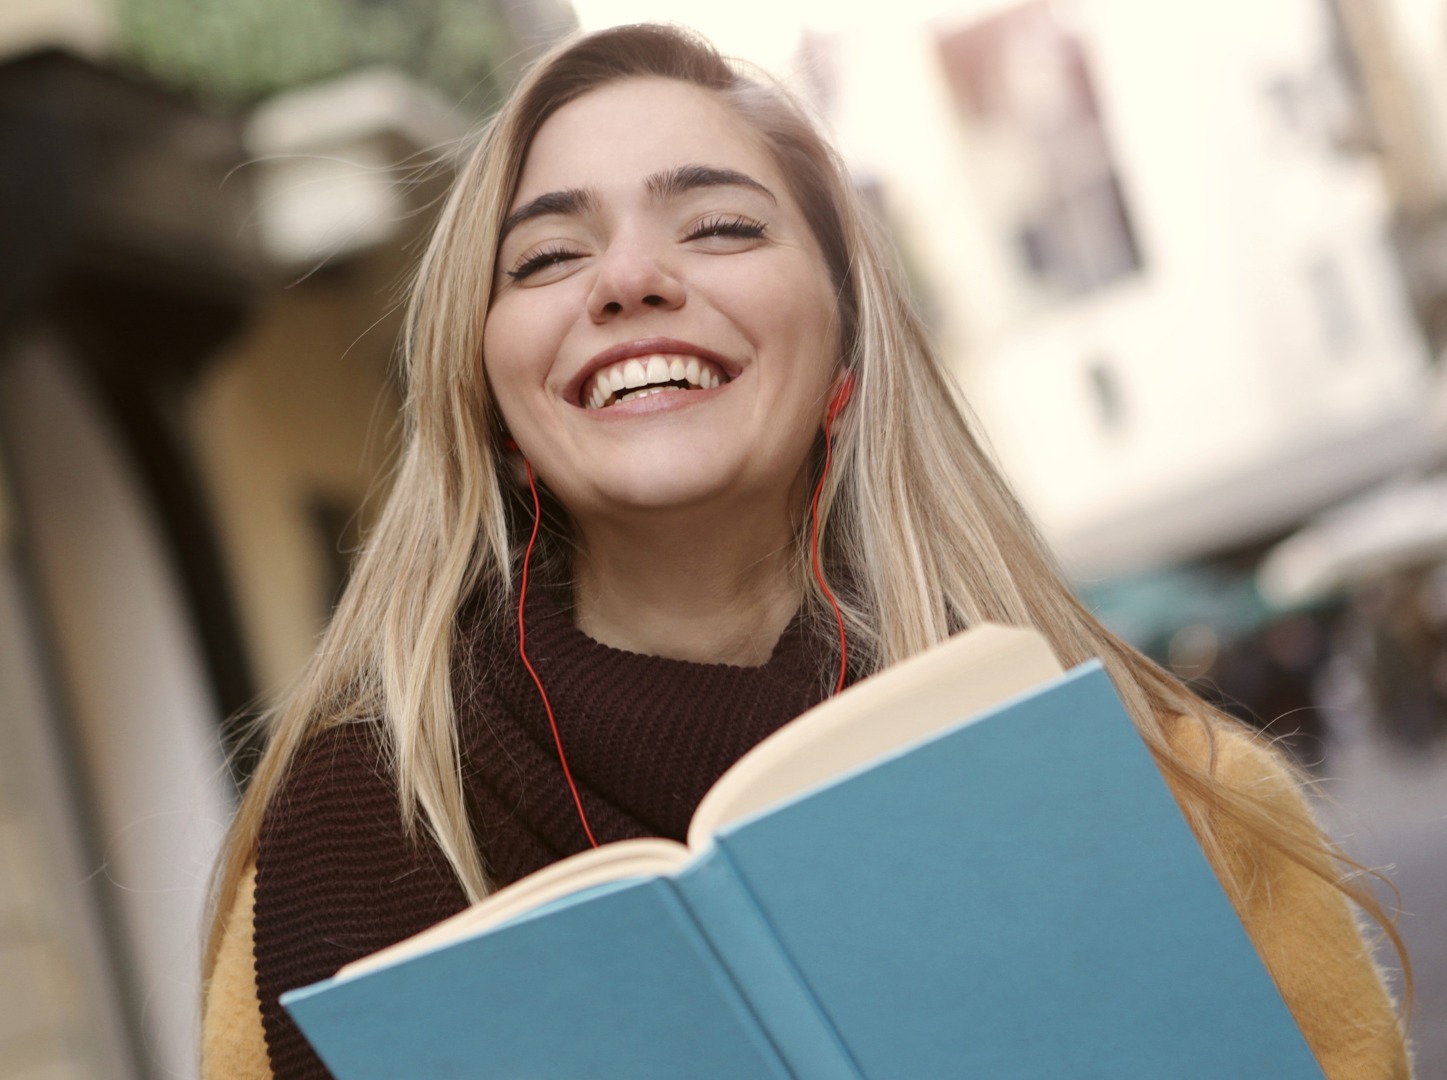 A high school student holds a book, smiling.